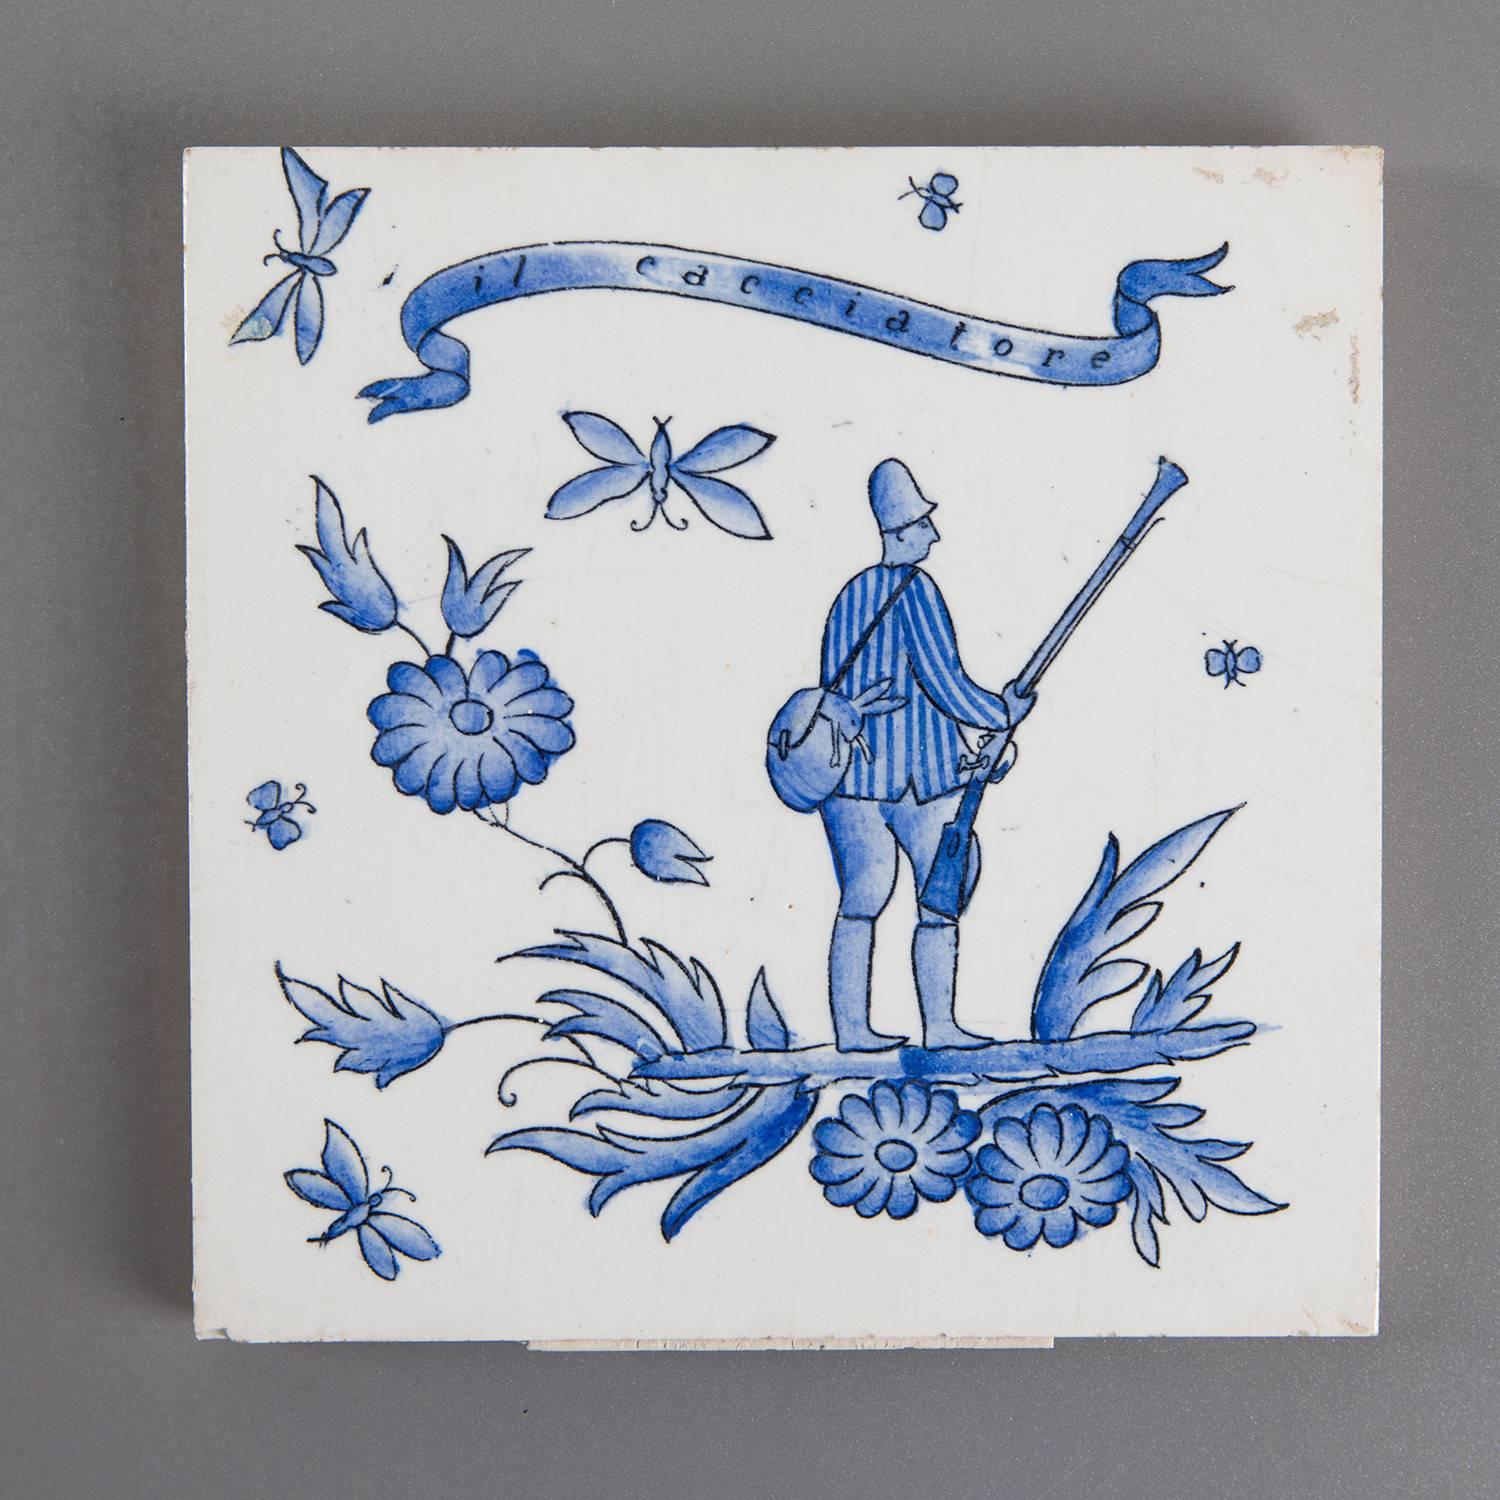 Rare set of 6 ceramic tiles by Gio Ponti.
Part of the 